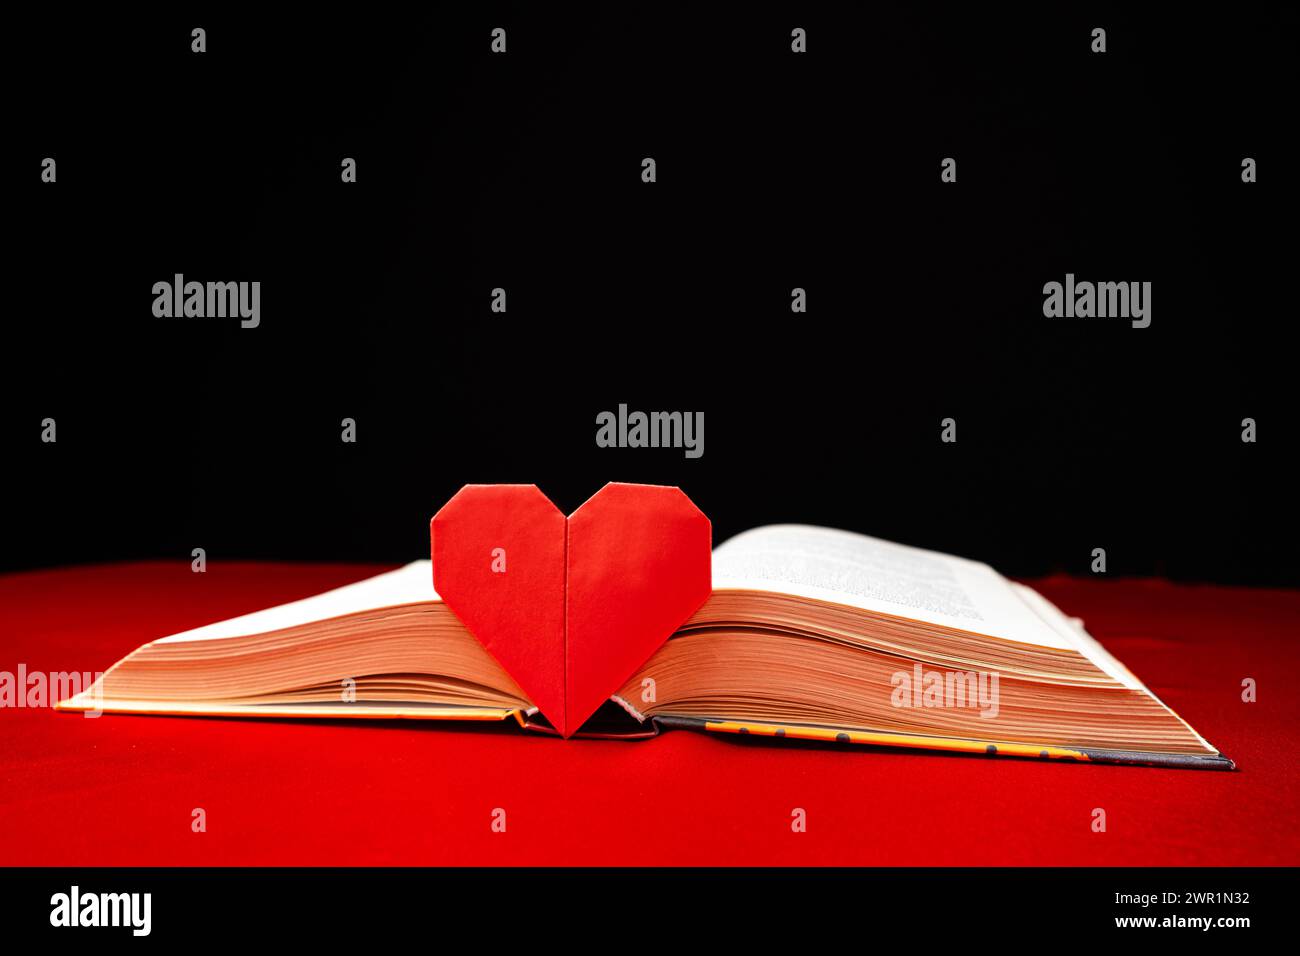 Origami paper heart and thick book on red and black background. Love for books. Stock Photo